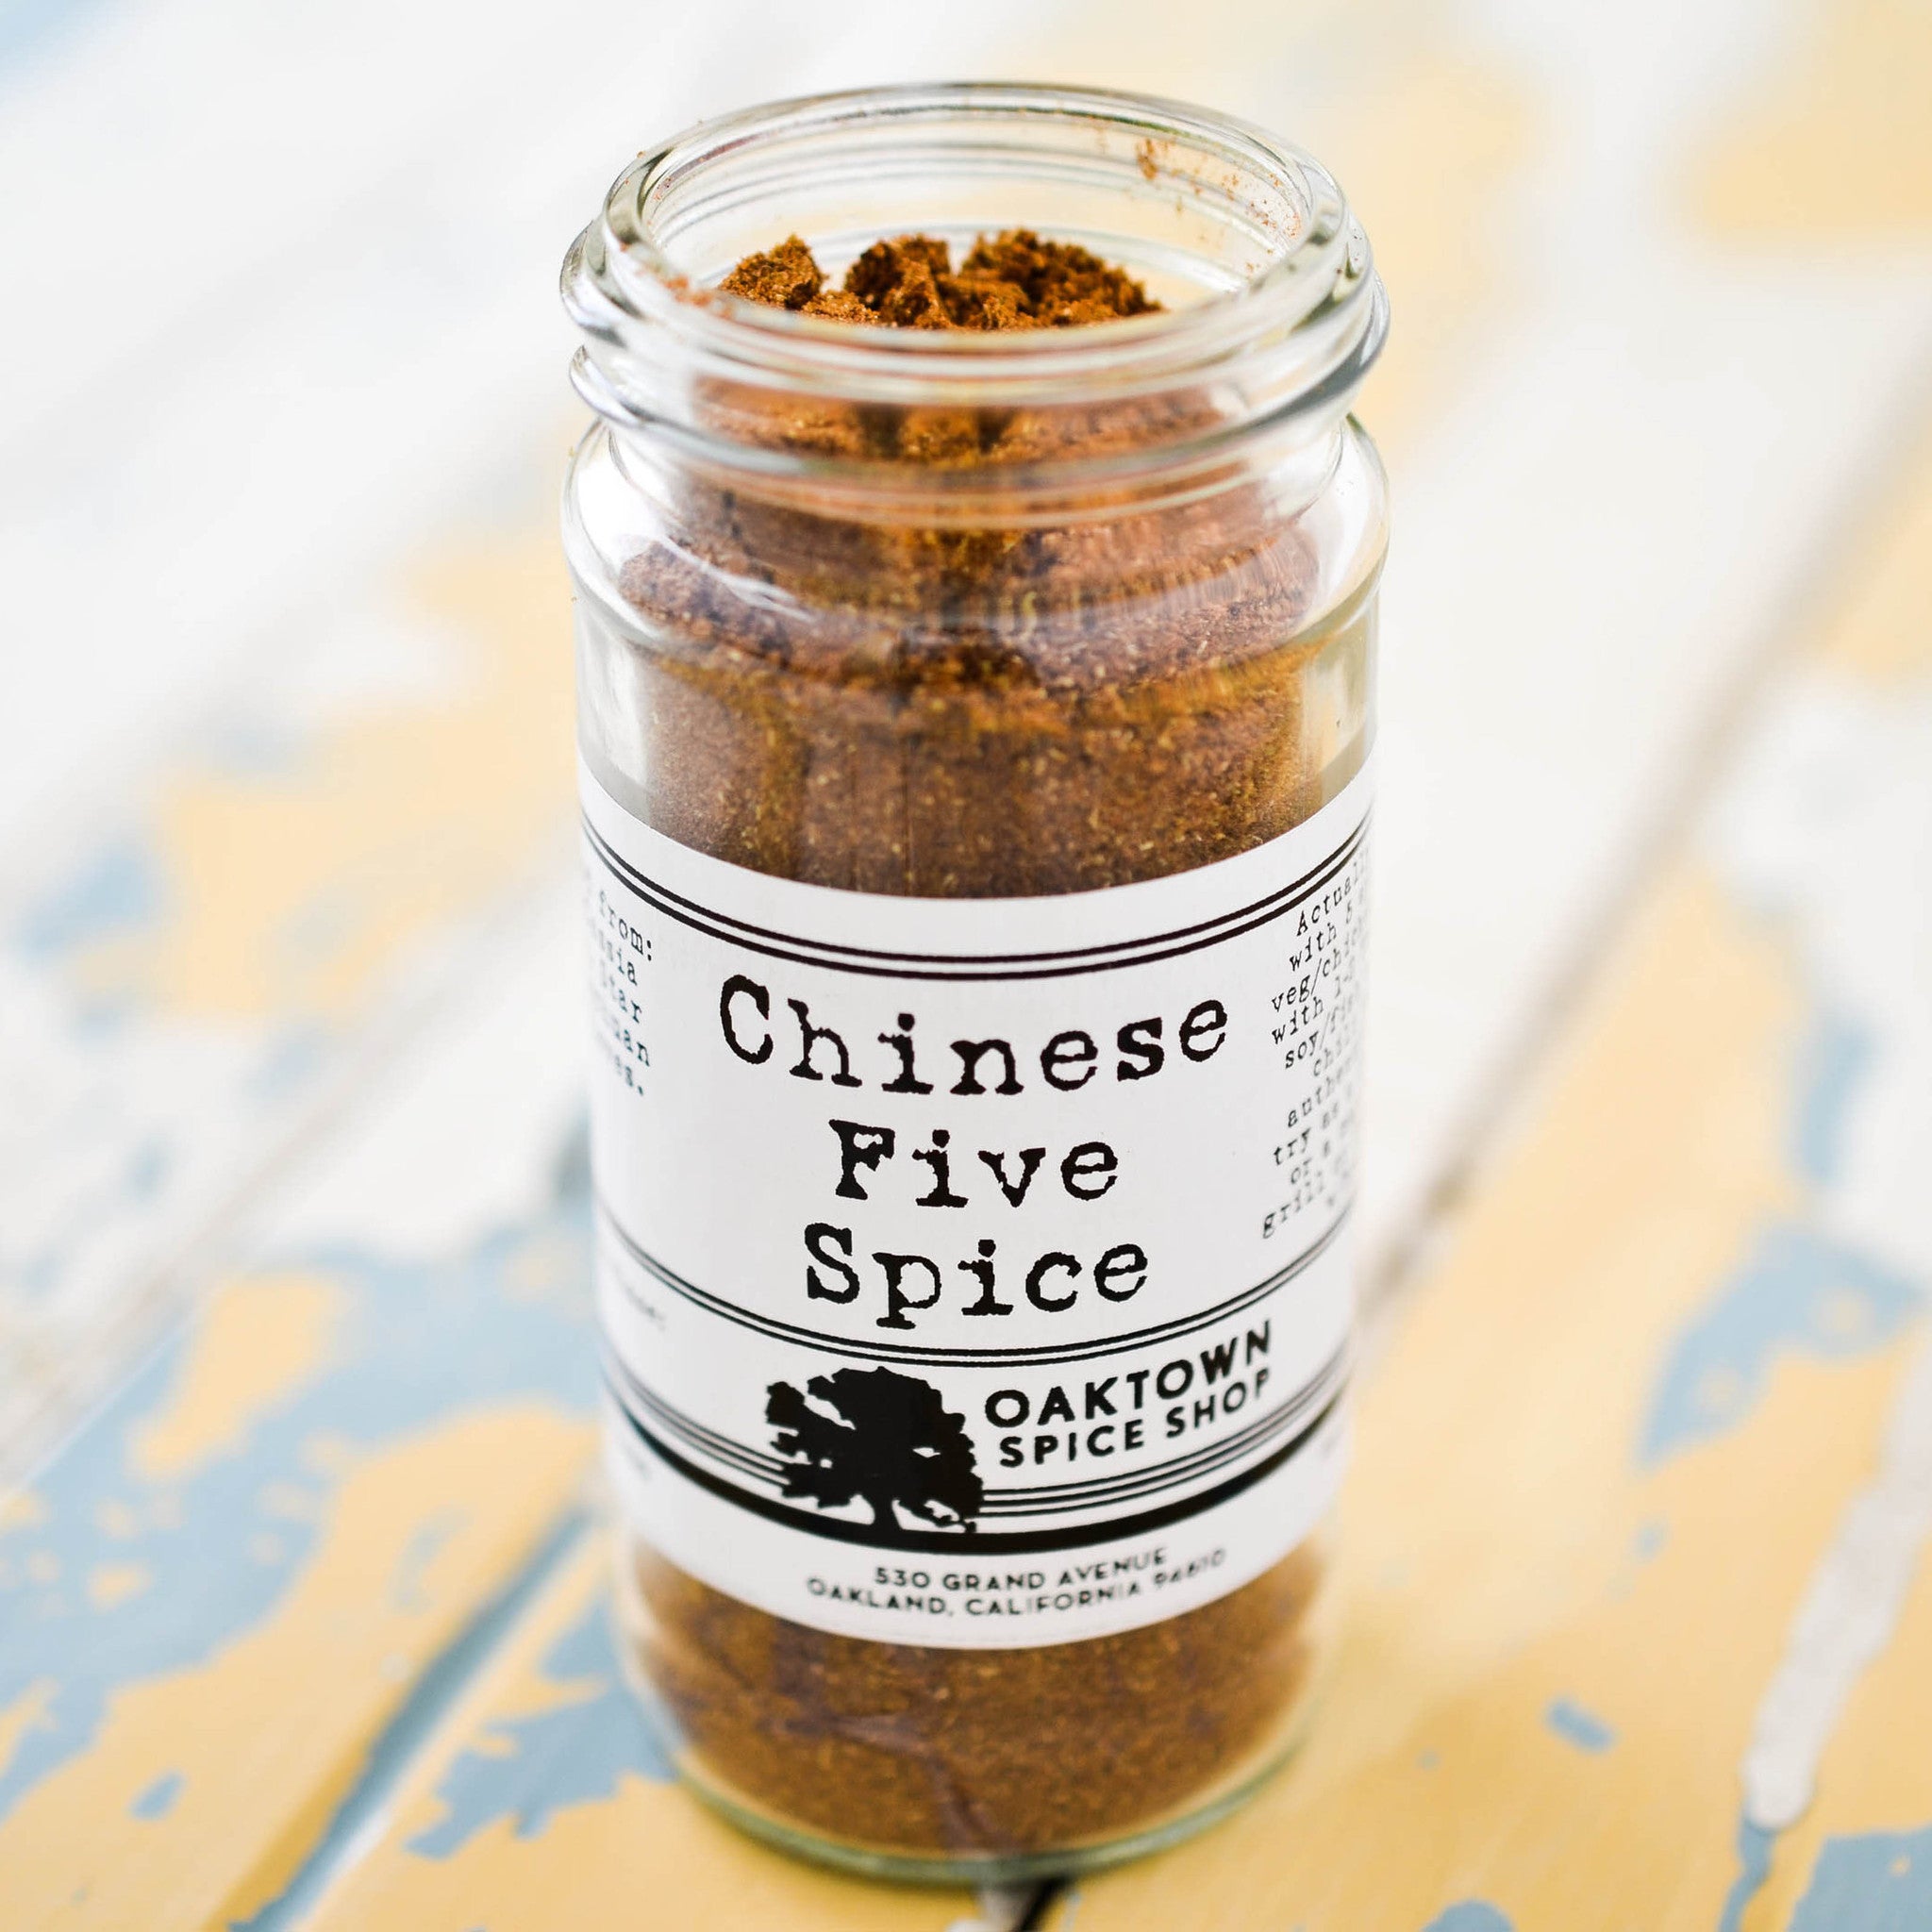 Chinese Five Spice Blend Hand Mixed with Fennel and Cinnamon and Star Anise Szechuan Pepper and Cloves by Oaktown Spice Shop